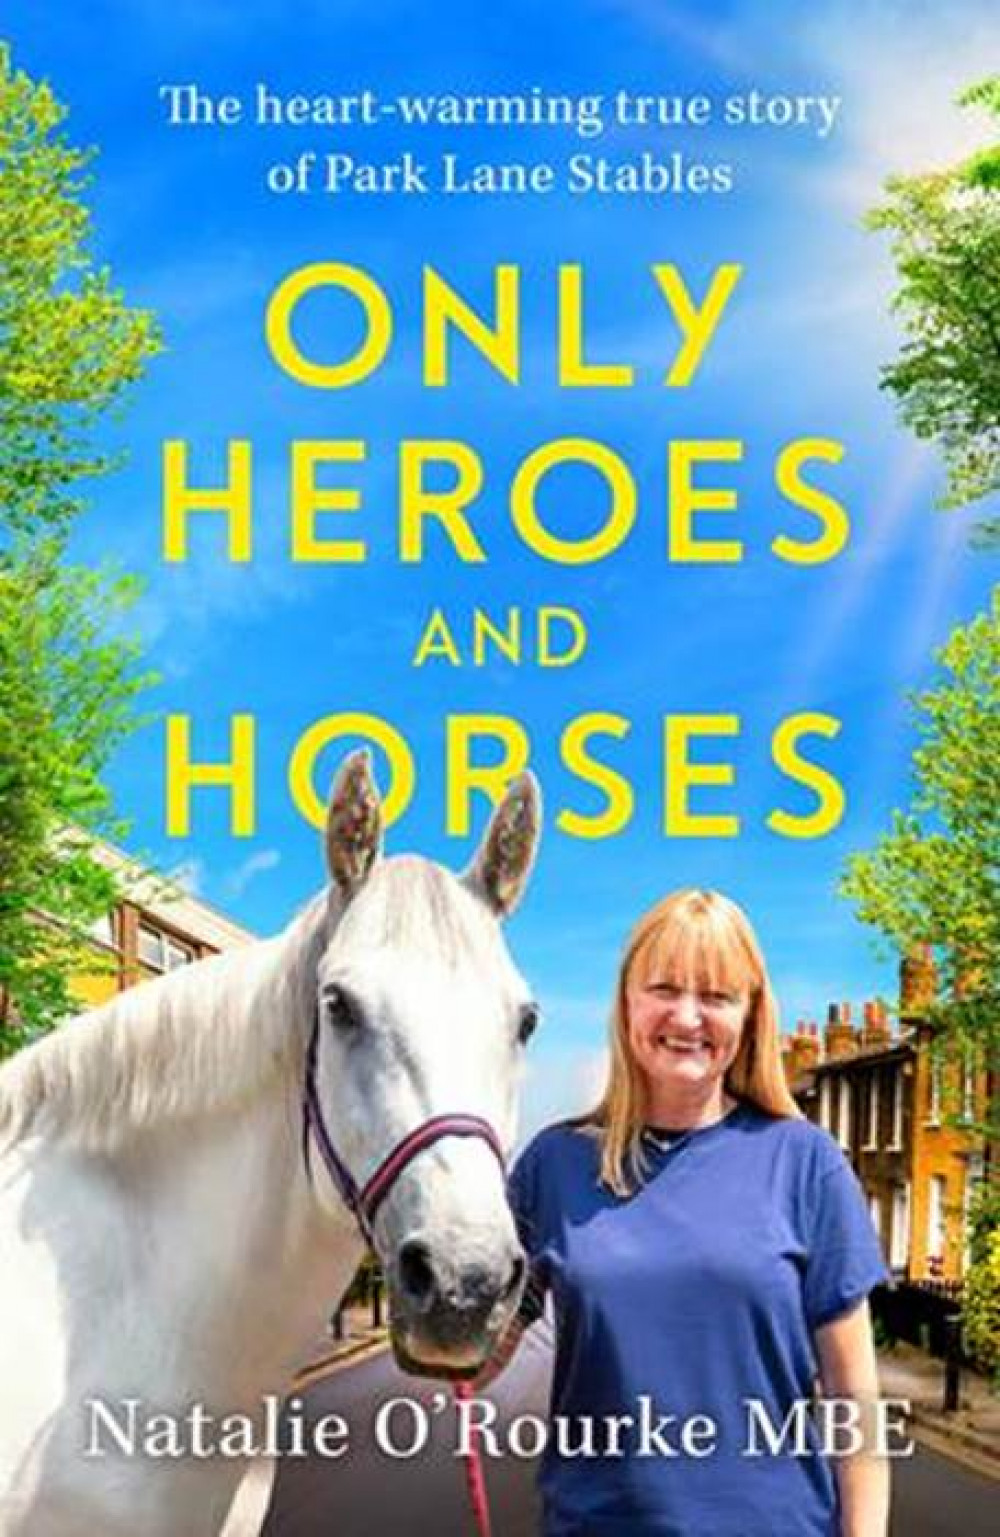 The woman behind the £1million campaign to save Park Lane stables, Natalie O'Rourke, will launch her book at the Park Hotel May 26th